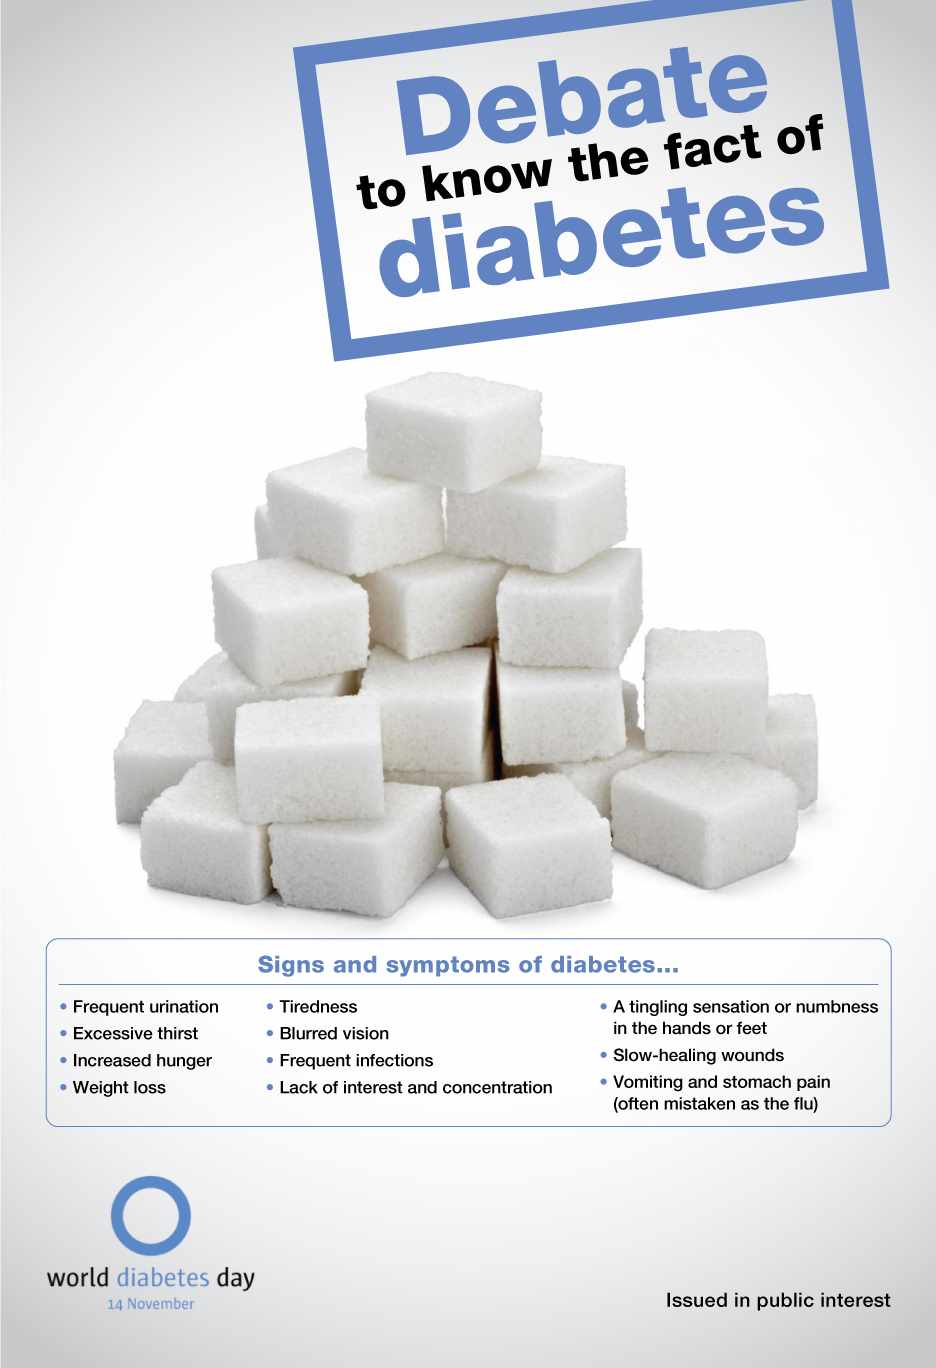 Debate To Know The Fact Of Diabetes Signs And Symptoms Of Diabetes World Diabetes Day 14th November